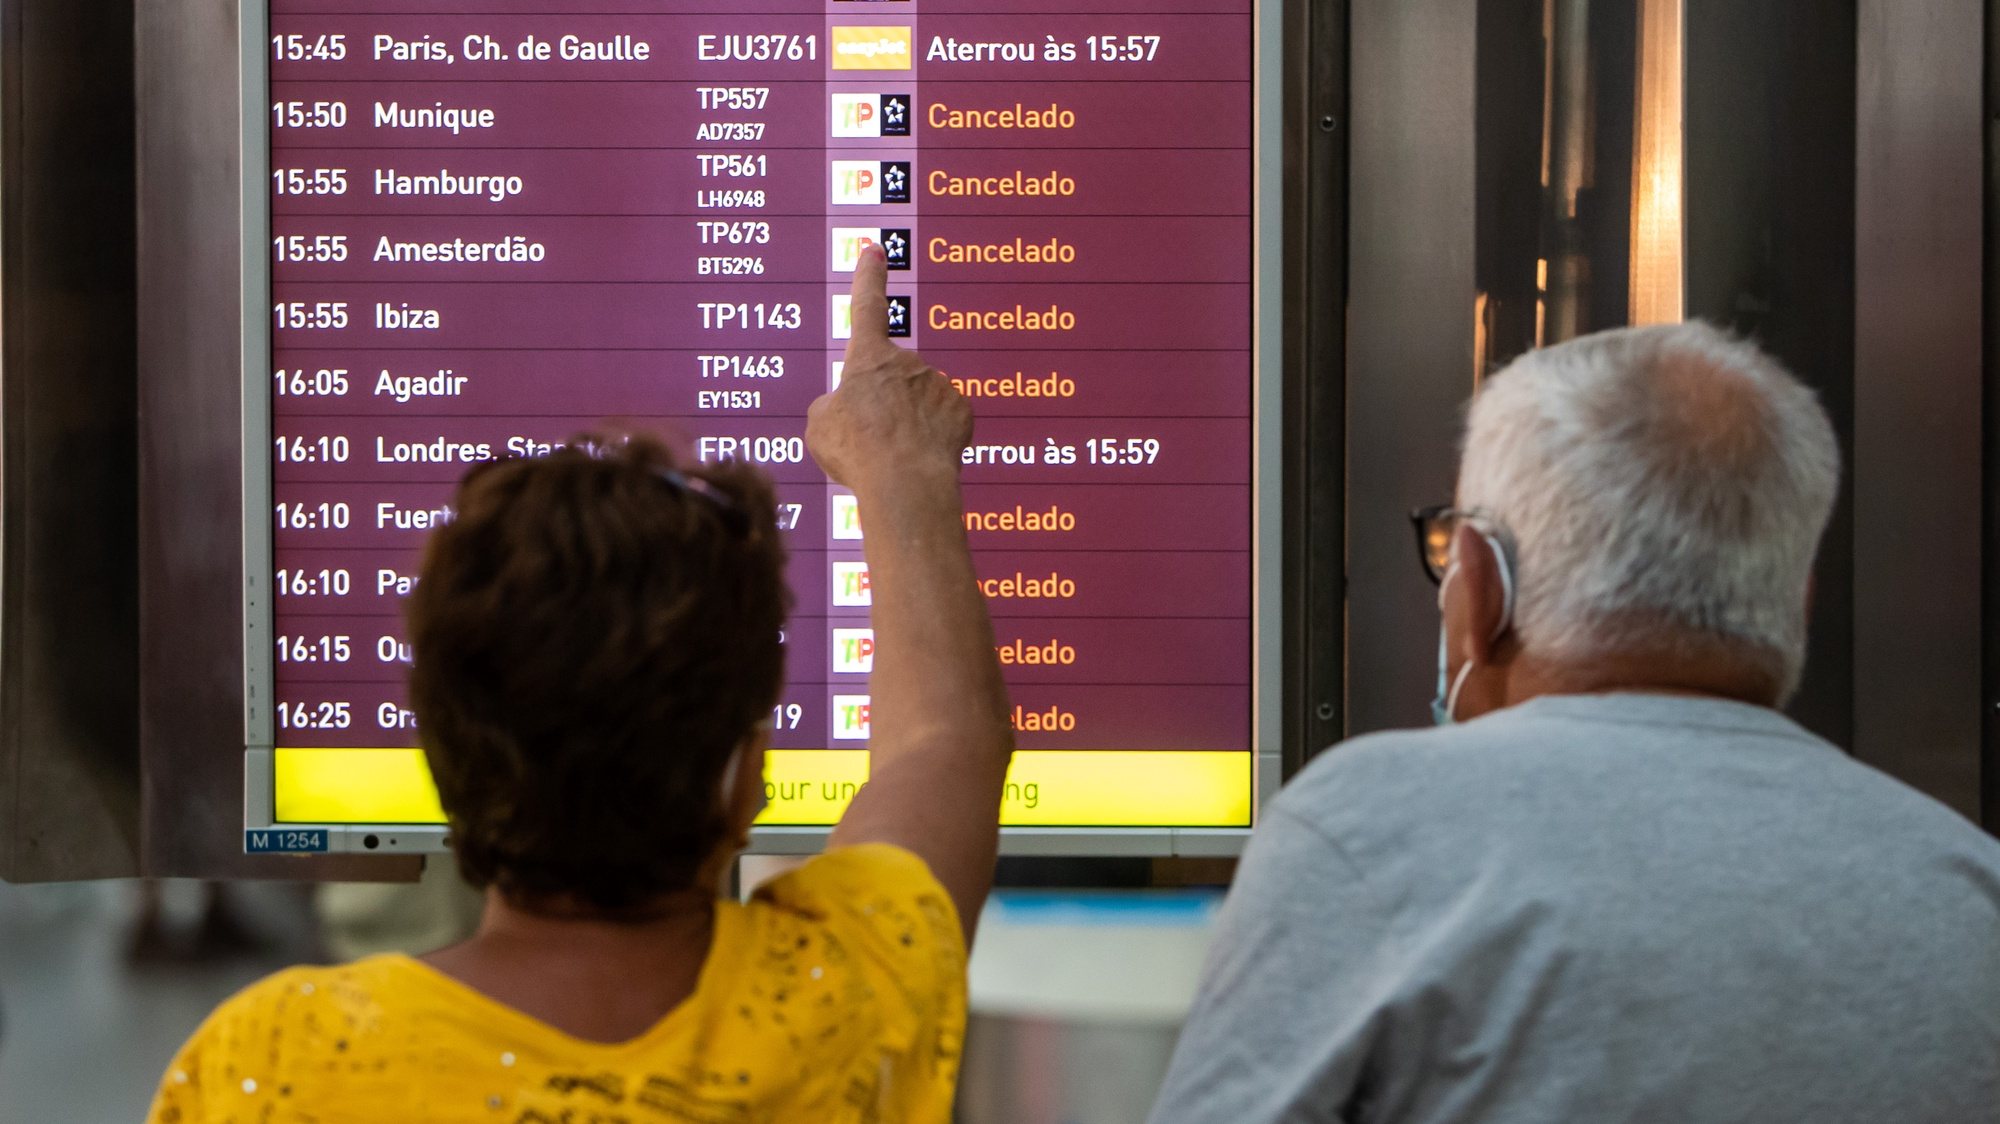 A woman points to a monitor with incoming flights to Lisbon, many of them canceled due to a strike of the handling company, Groundforce, which is causing major disruption in the Lisbon Airport, causing the cancelation of dozens of flights, in Lisbon, Portugal, 17 July 2021. Groundforce workers are protesting against colective dismissal of workers and low salaries. JOSE SENA GOULAO/LUSA